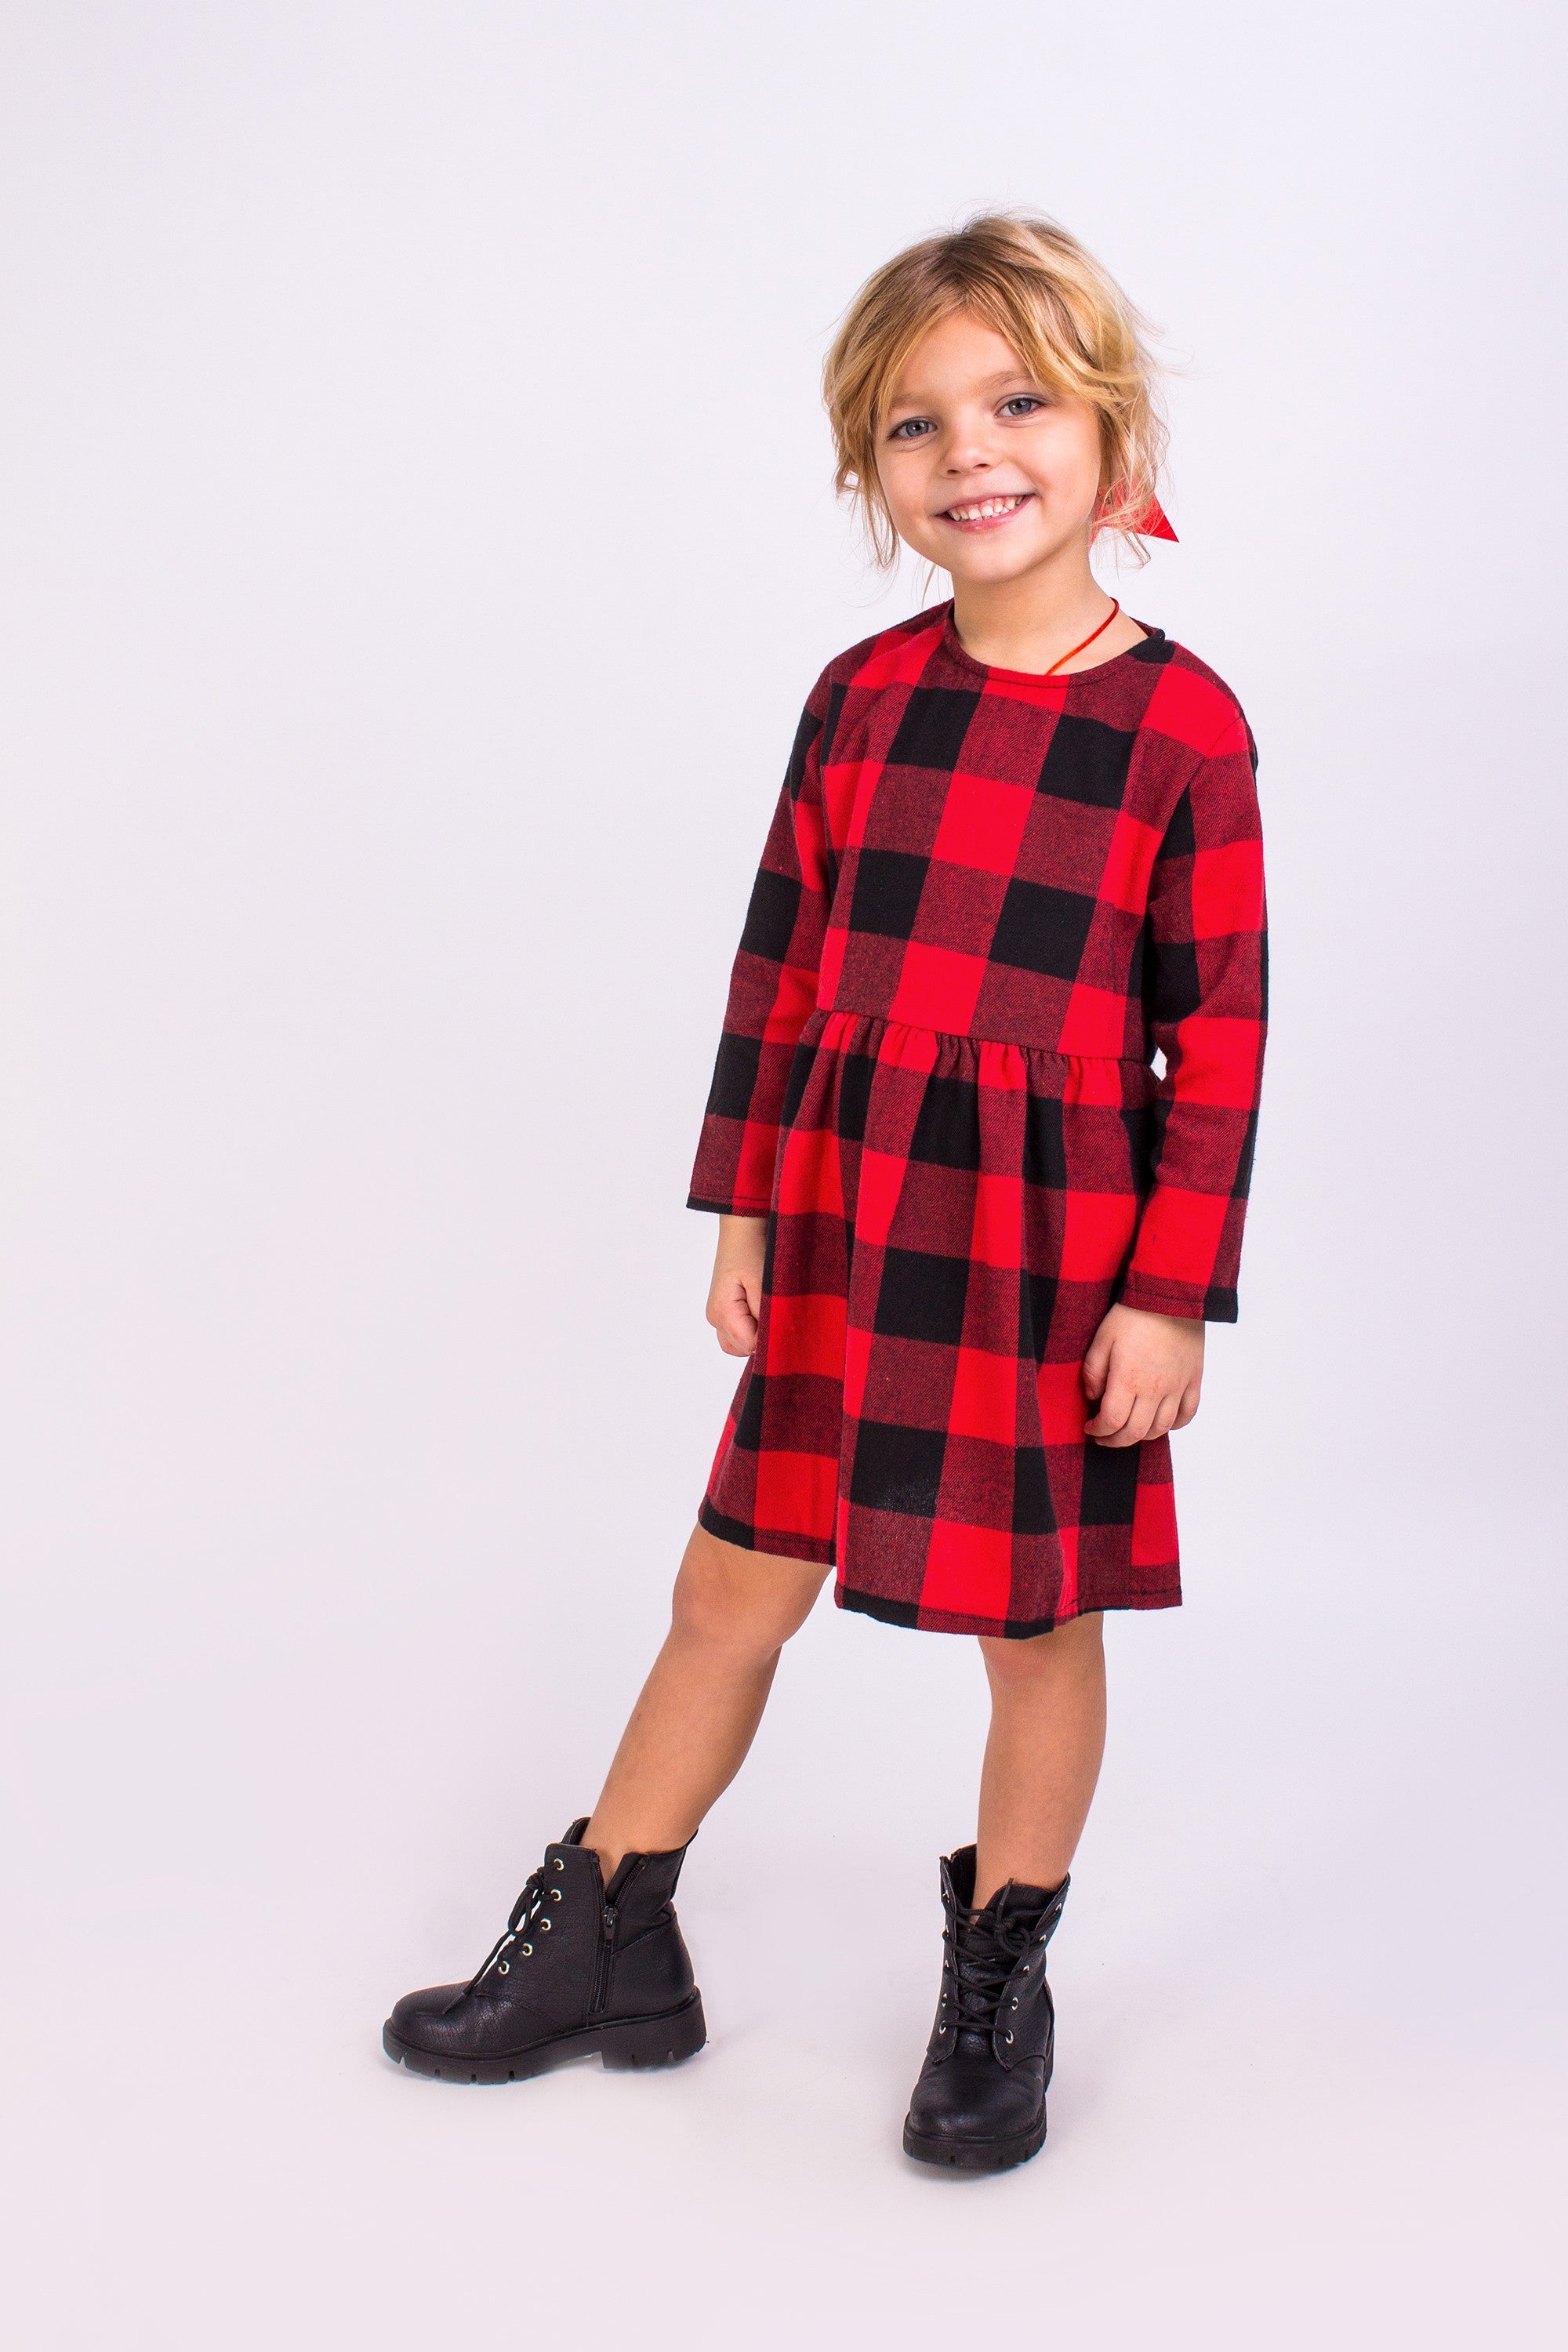 Kids Christmas Dresses For Girls 3 to 7Years Red Deers Print Belted Tulle  Dress New Year